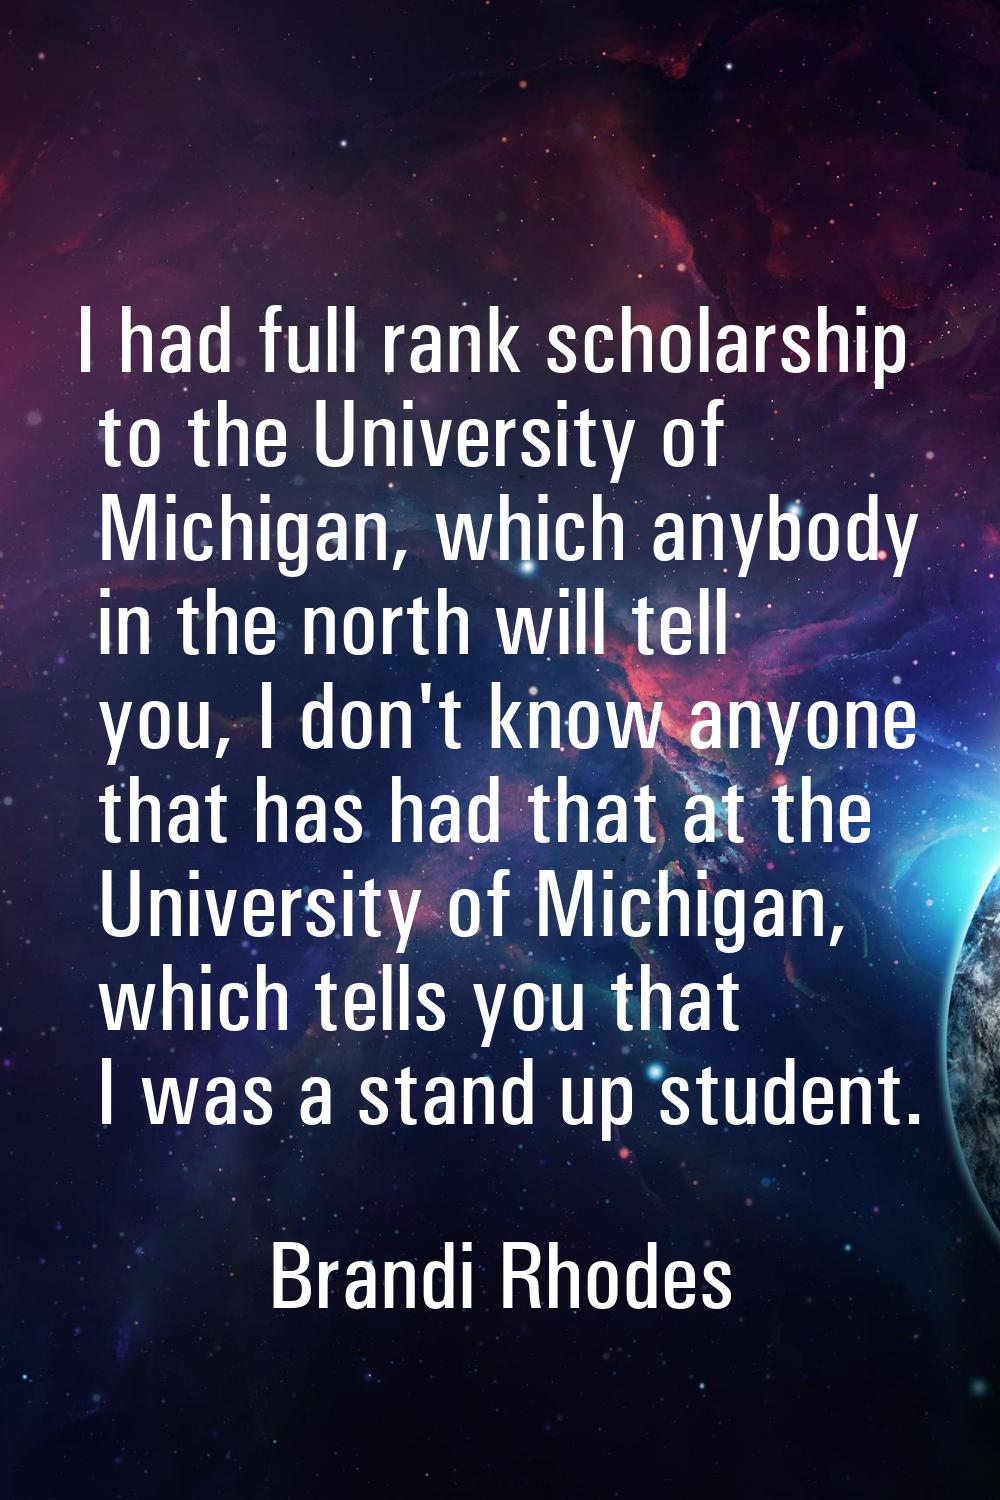 I had full rank scholarship to the University of Michigan, which anybody in the north will tell you